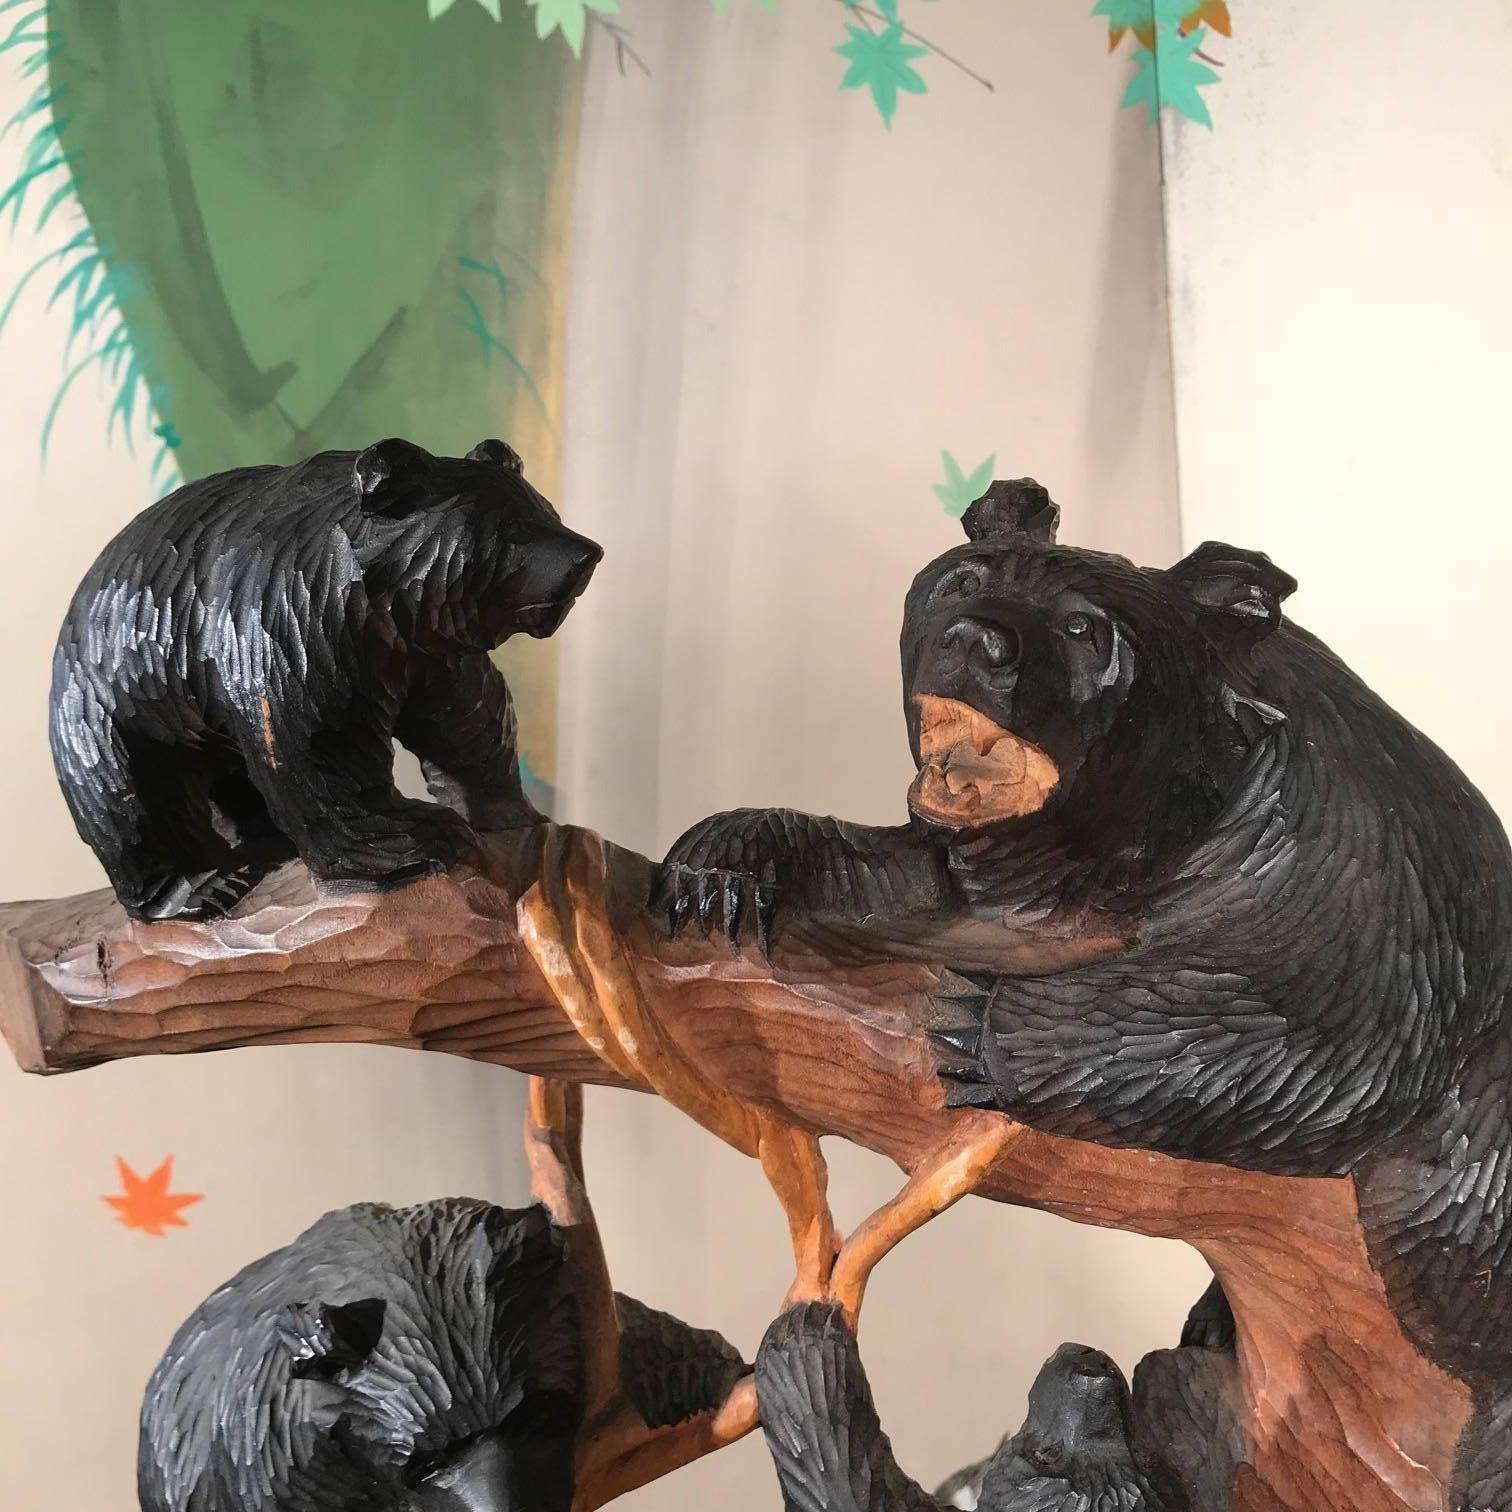 Japanese Bear Family Climbing Tree, Old Japan Handcrafted Sculpture, Mint and Signed